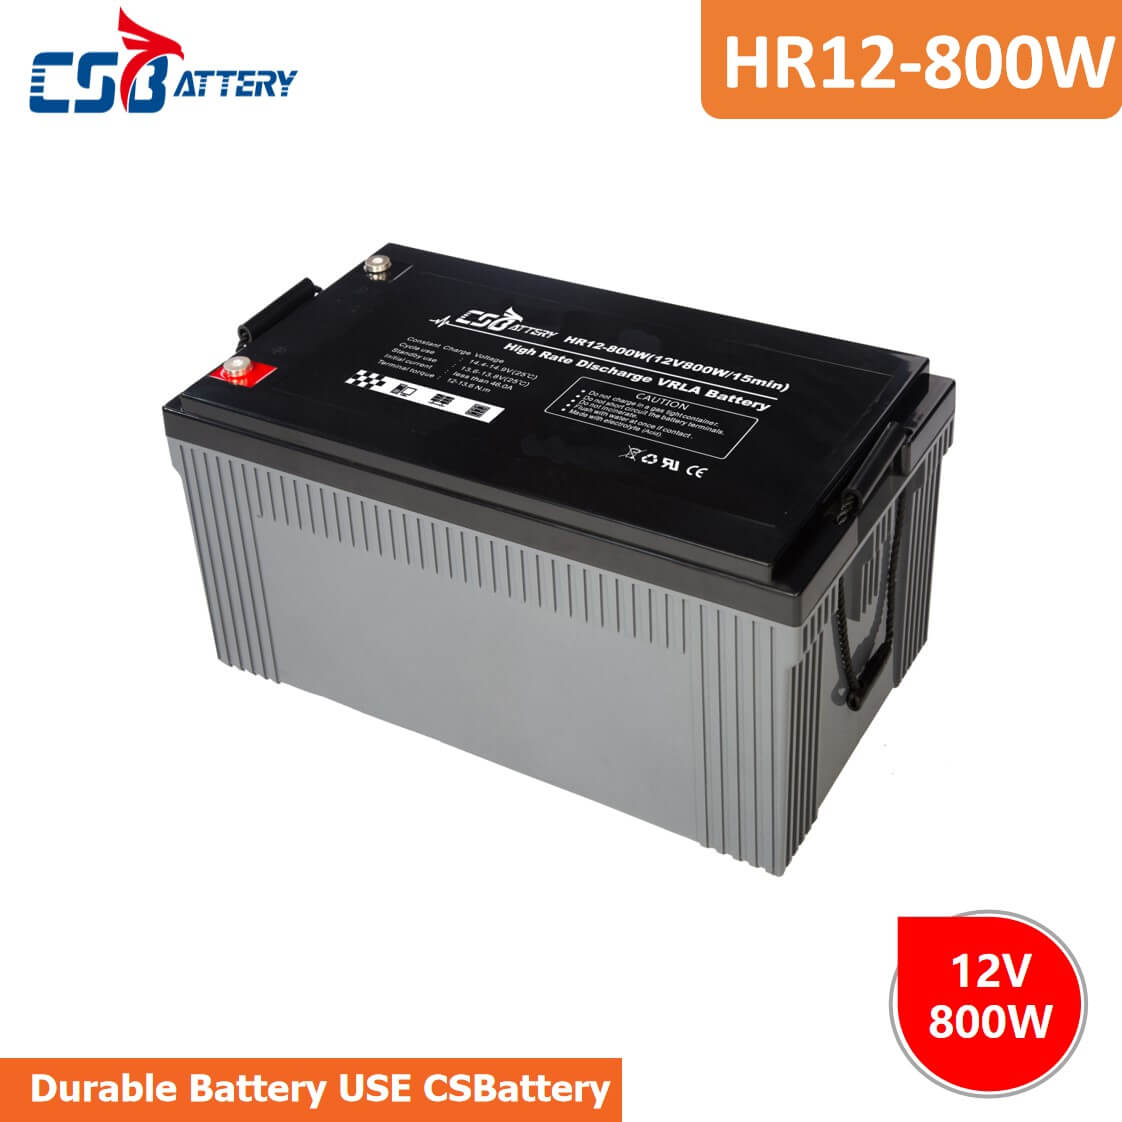 HR12-800W High Discharge Rate Battery